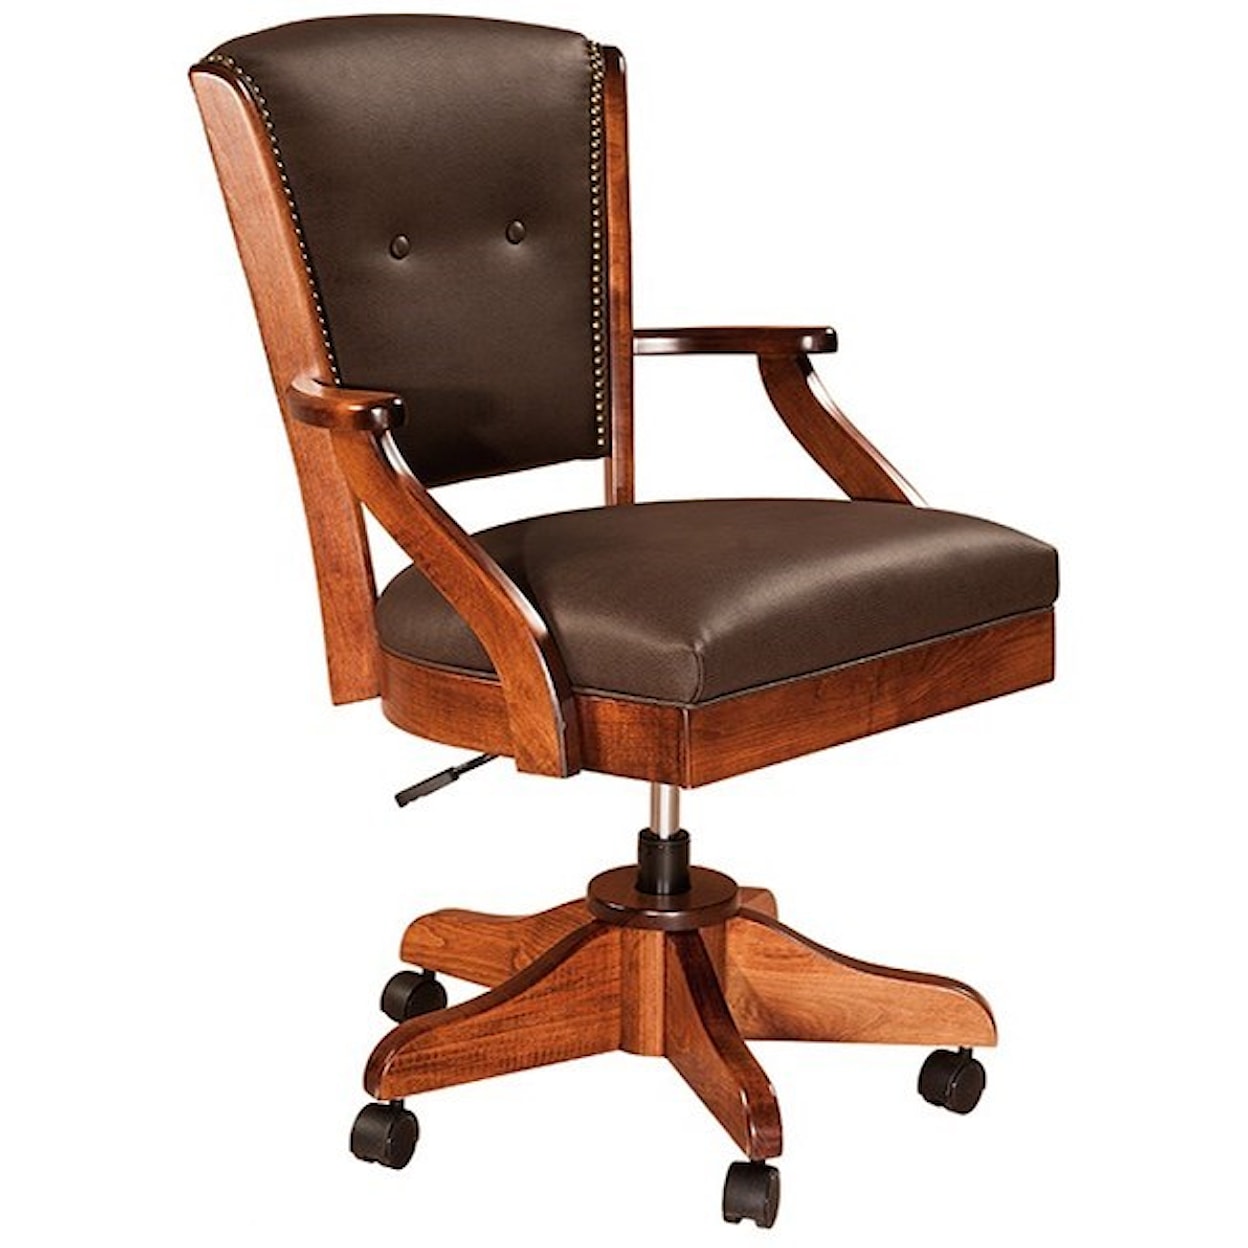 F&N Woodworking Lansfield Customizable Solid Wood Short Arm Desk Chair